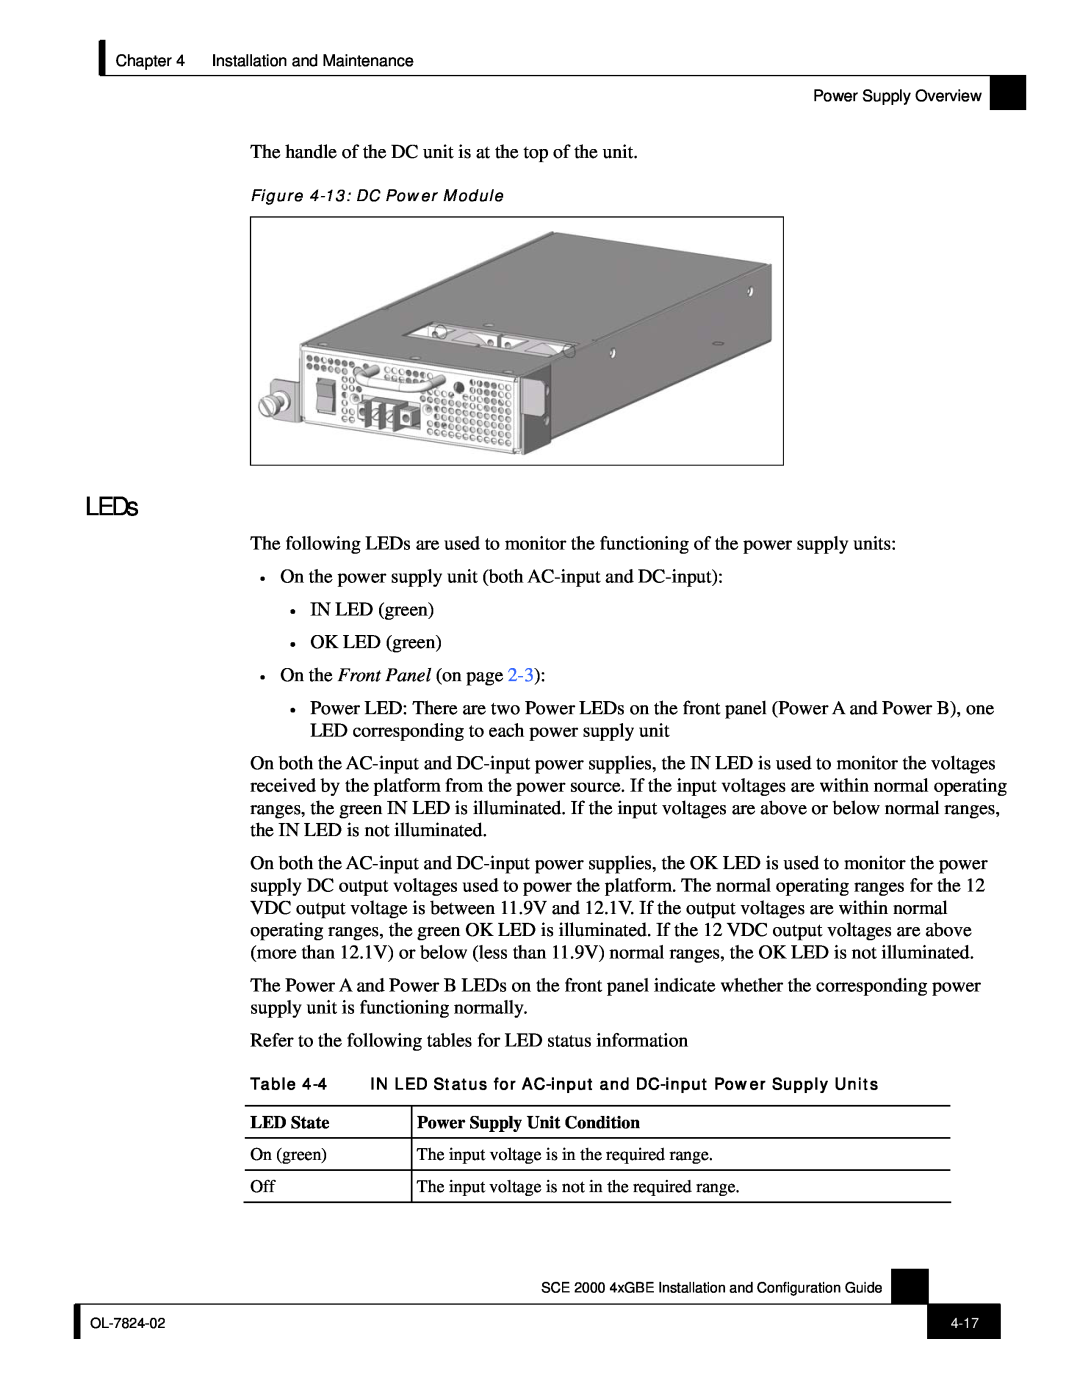 Cisco Systems SCE 2000 4xGBE manual LEDs 